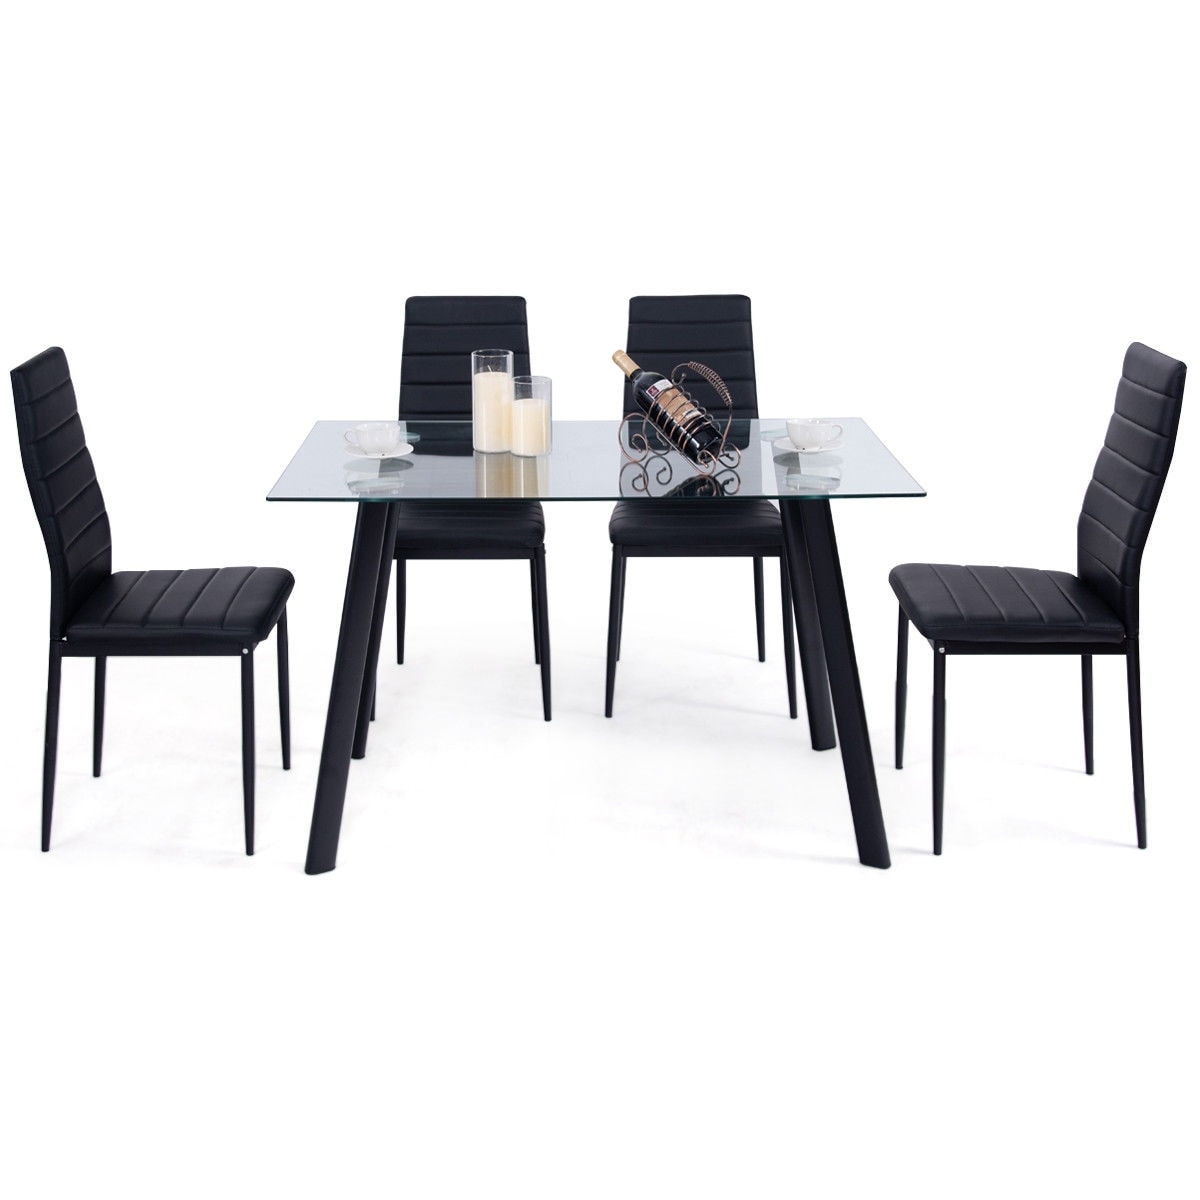 Shop Costway Modern Glass Dining Table Set Tempered Glass Top PVC